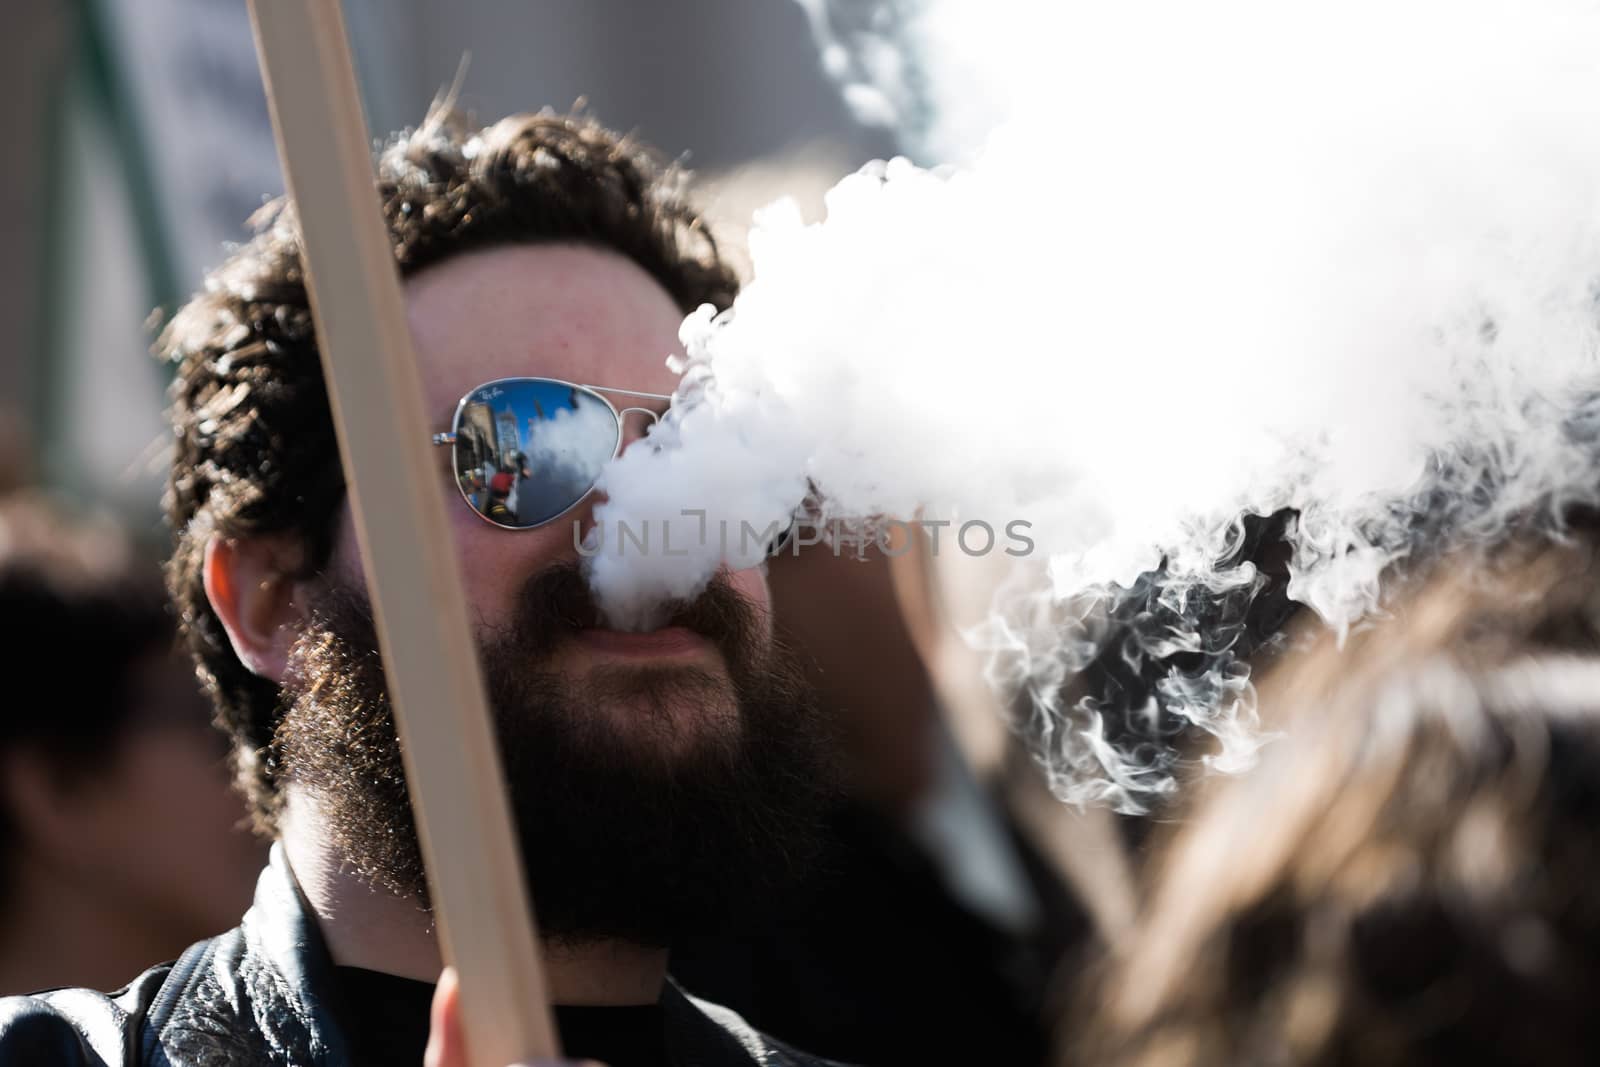 MELBOURNE/AUSTRALIA - AUGUST 16, 2016: Protesters from the New Nicotine Alliance held a rally outside the Victorian Parliament house on Tuesday in time for Question Time.